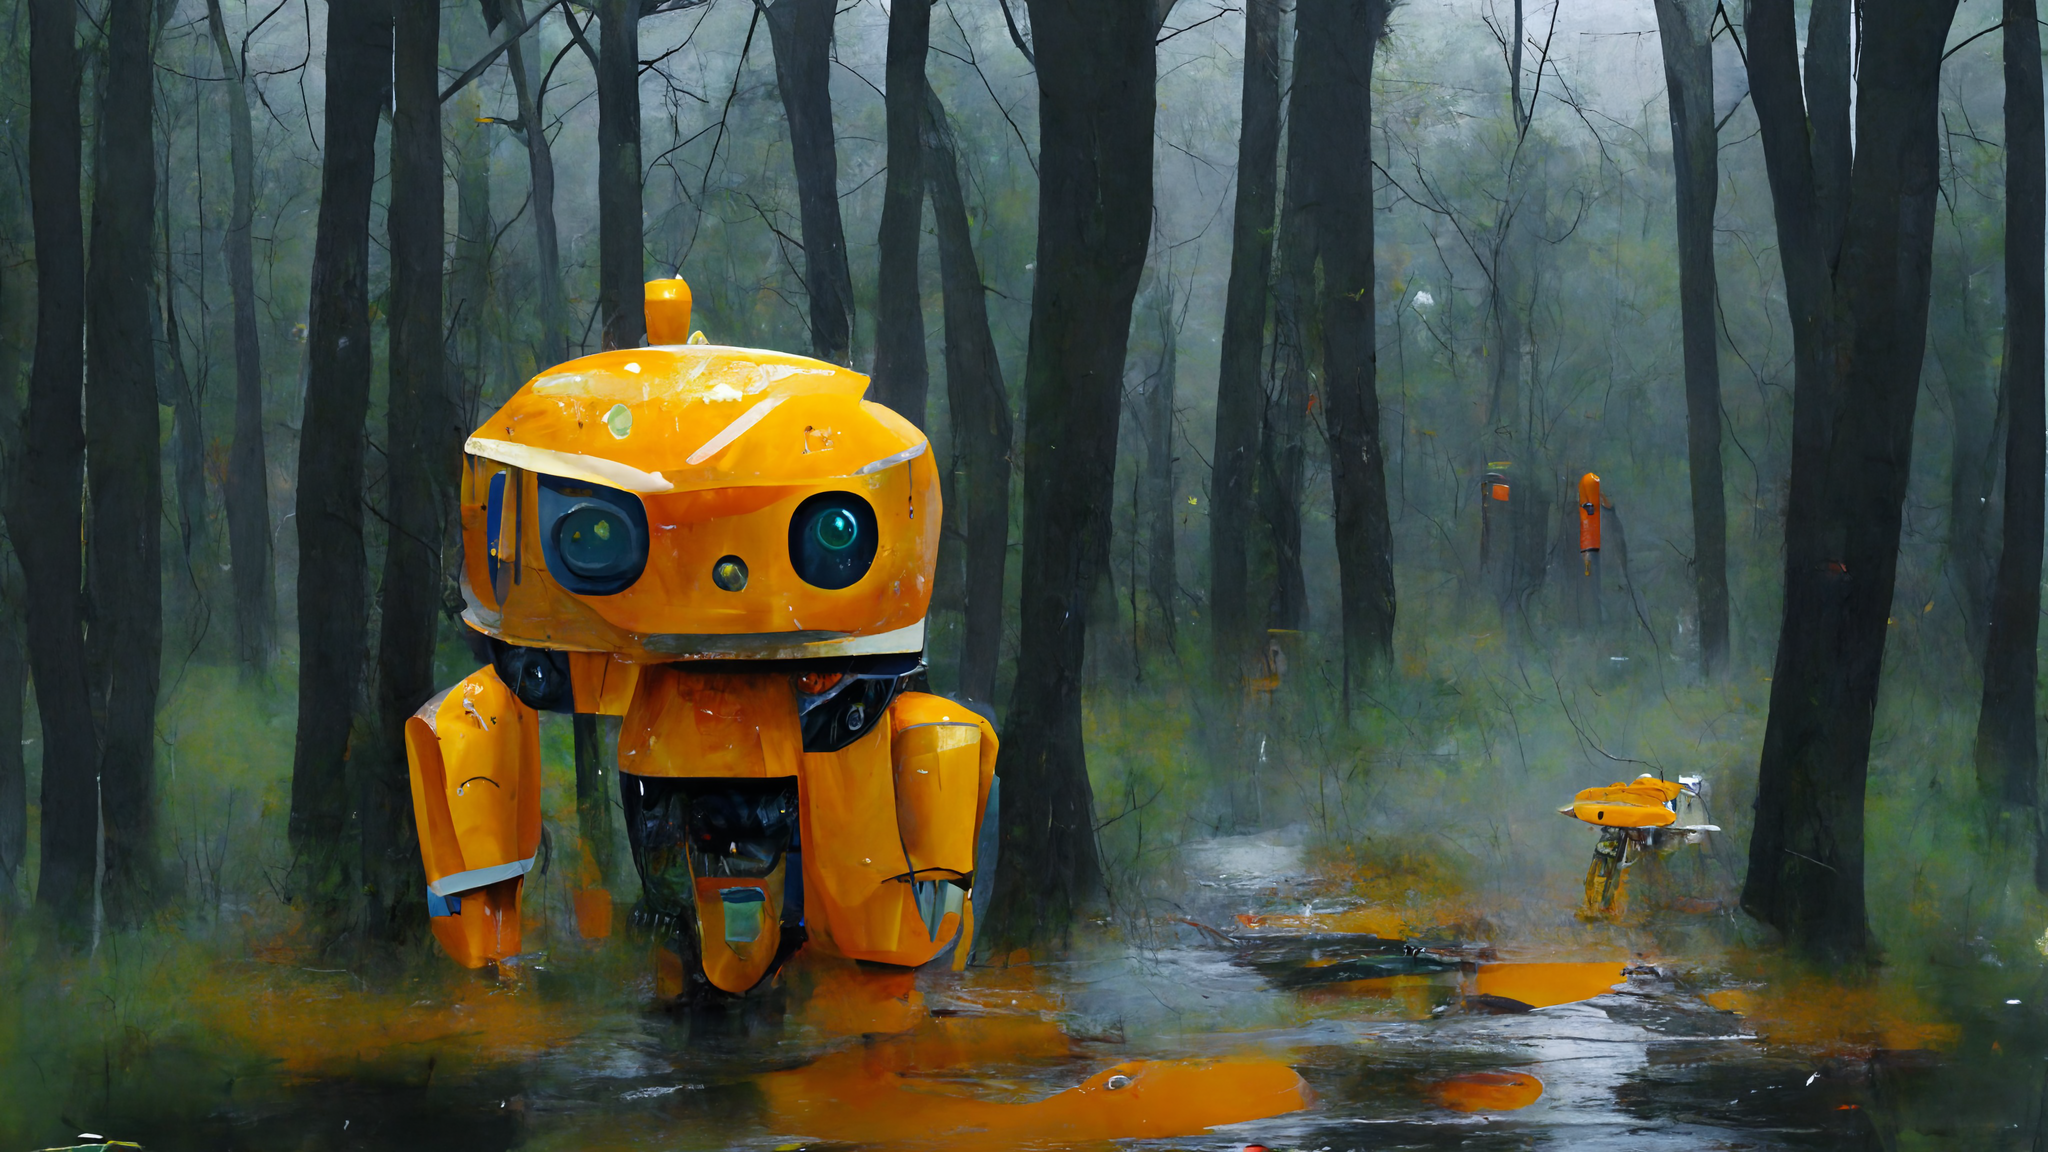 a yellow and orange robot in a forest during rain